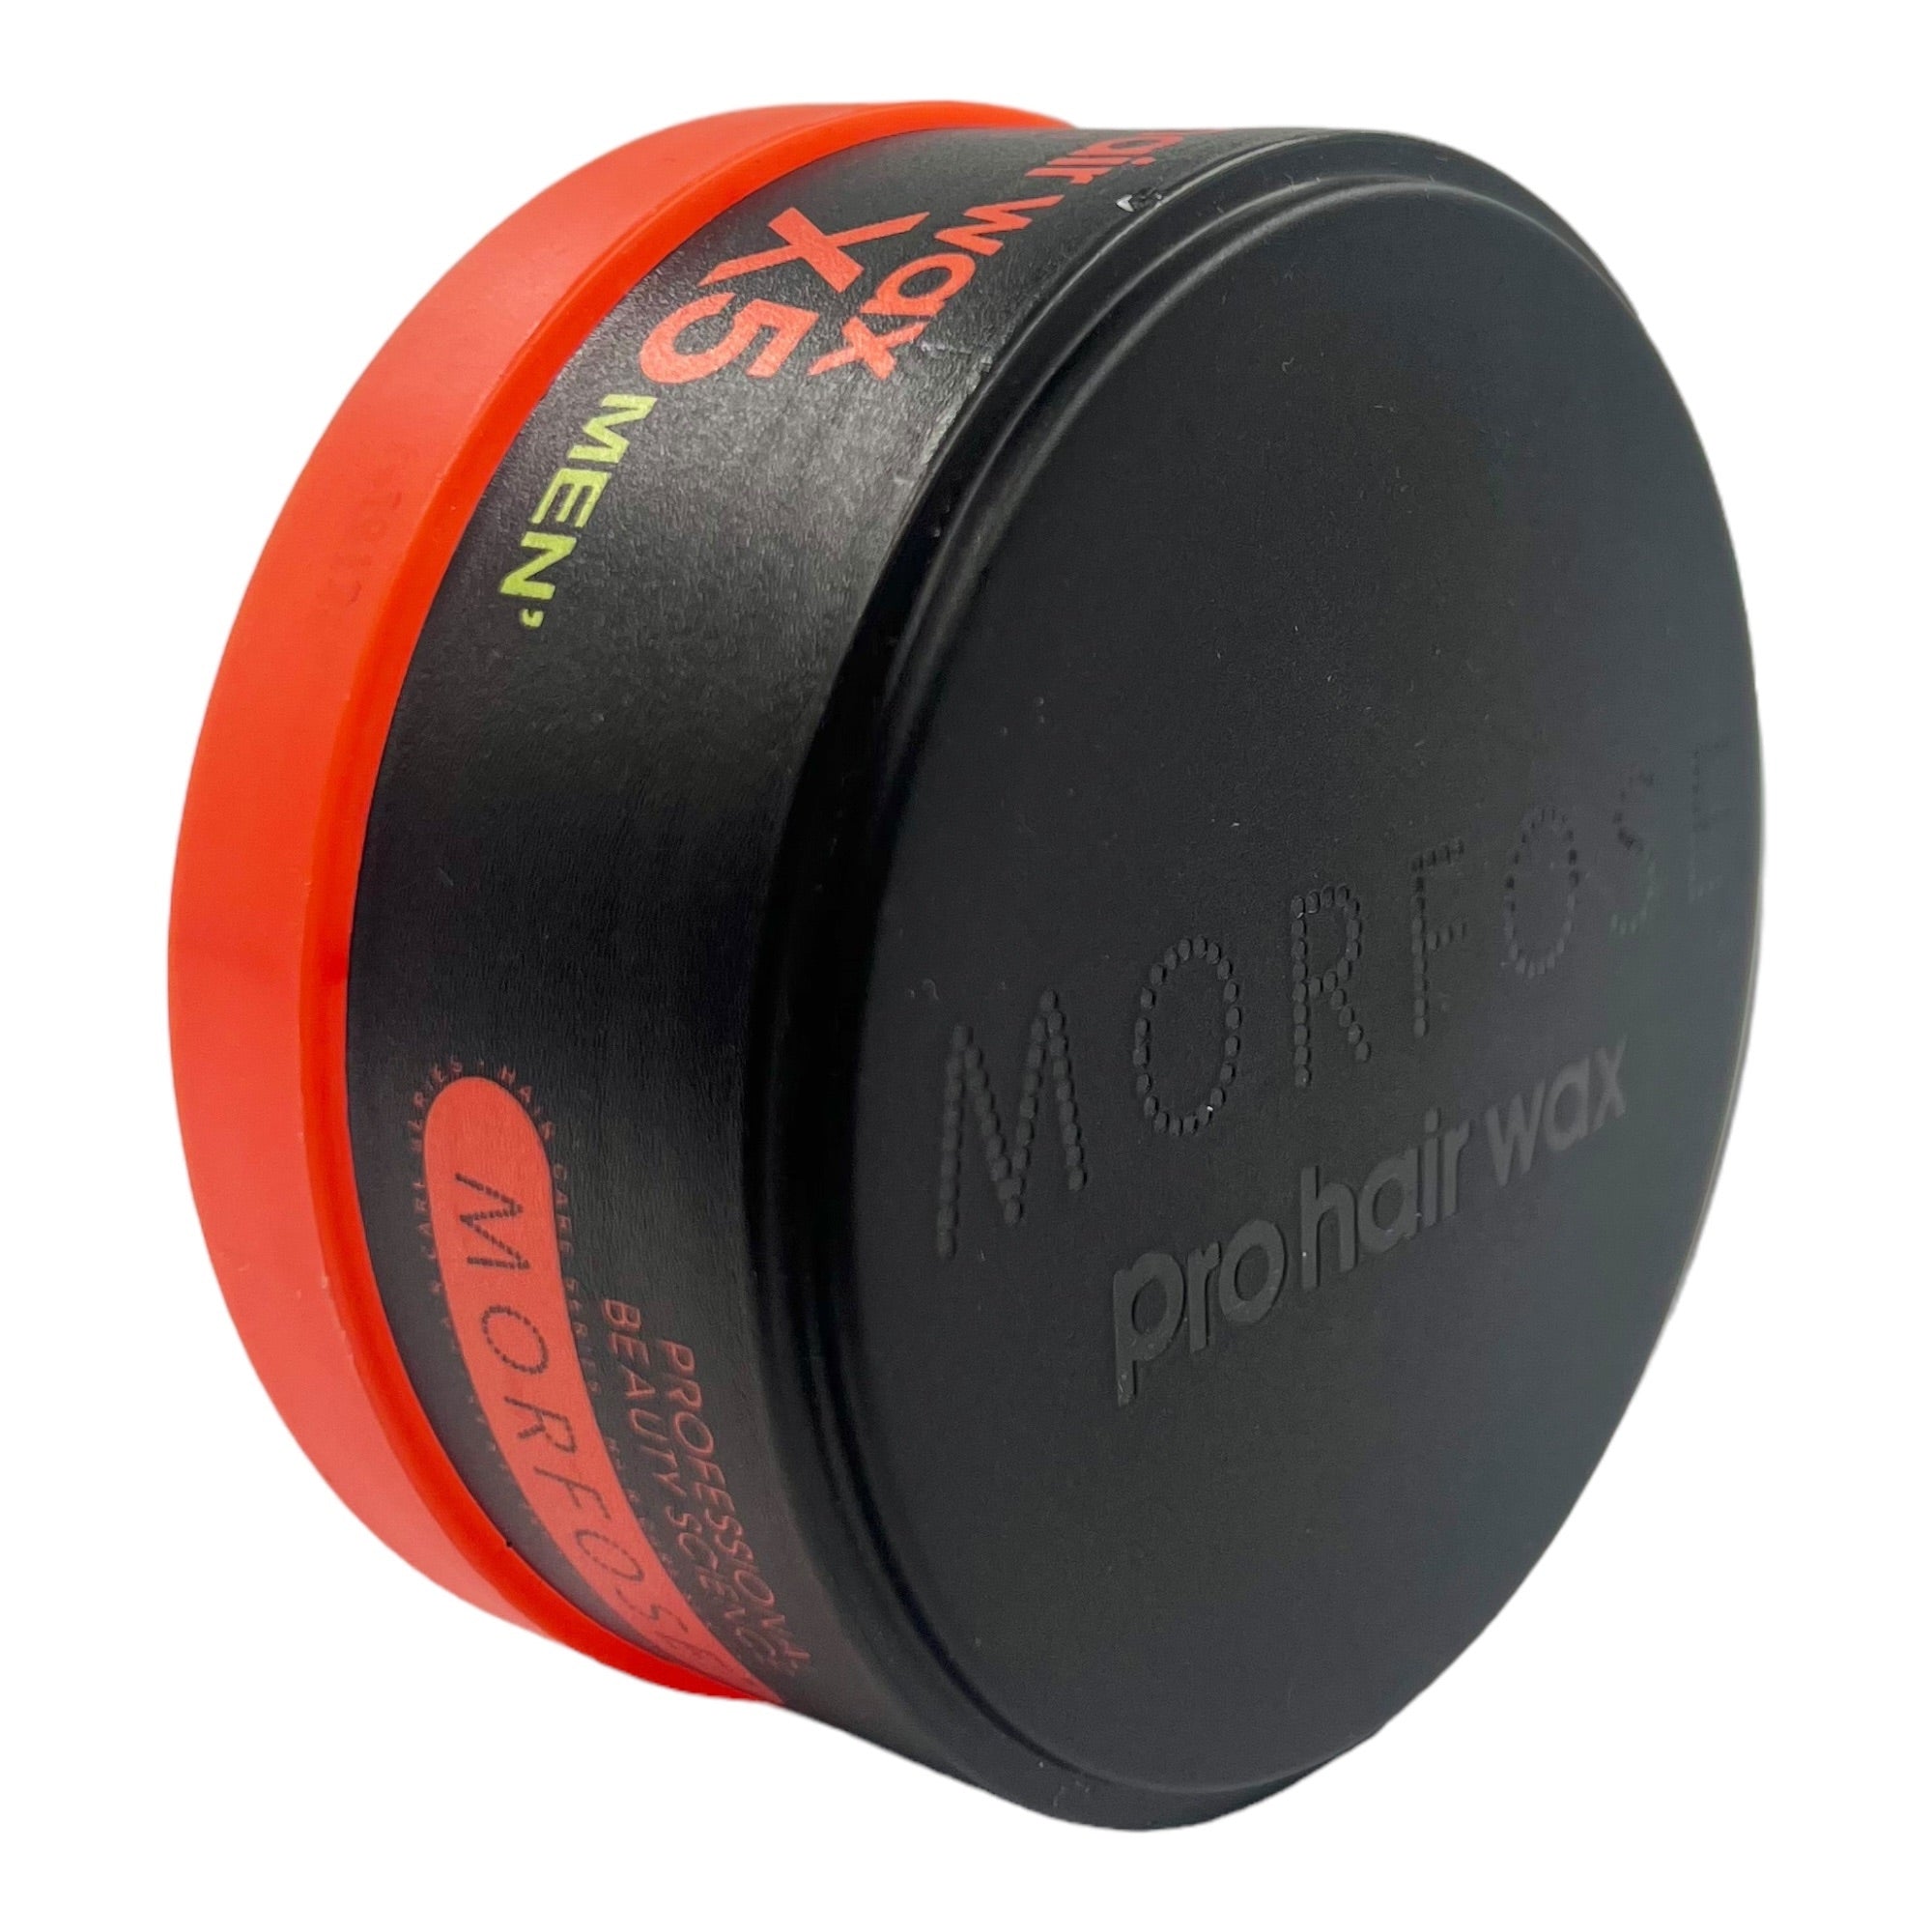 Morfose - Strong Hold Pro Hair Wax X5 150ml